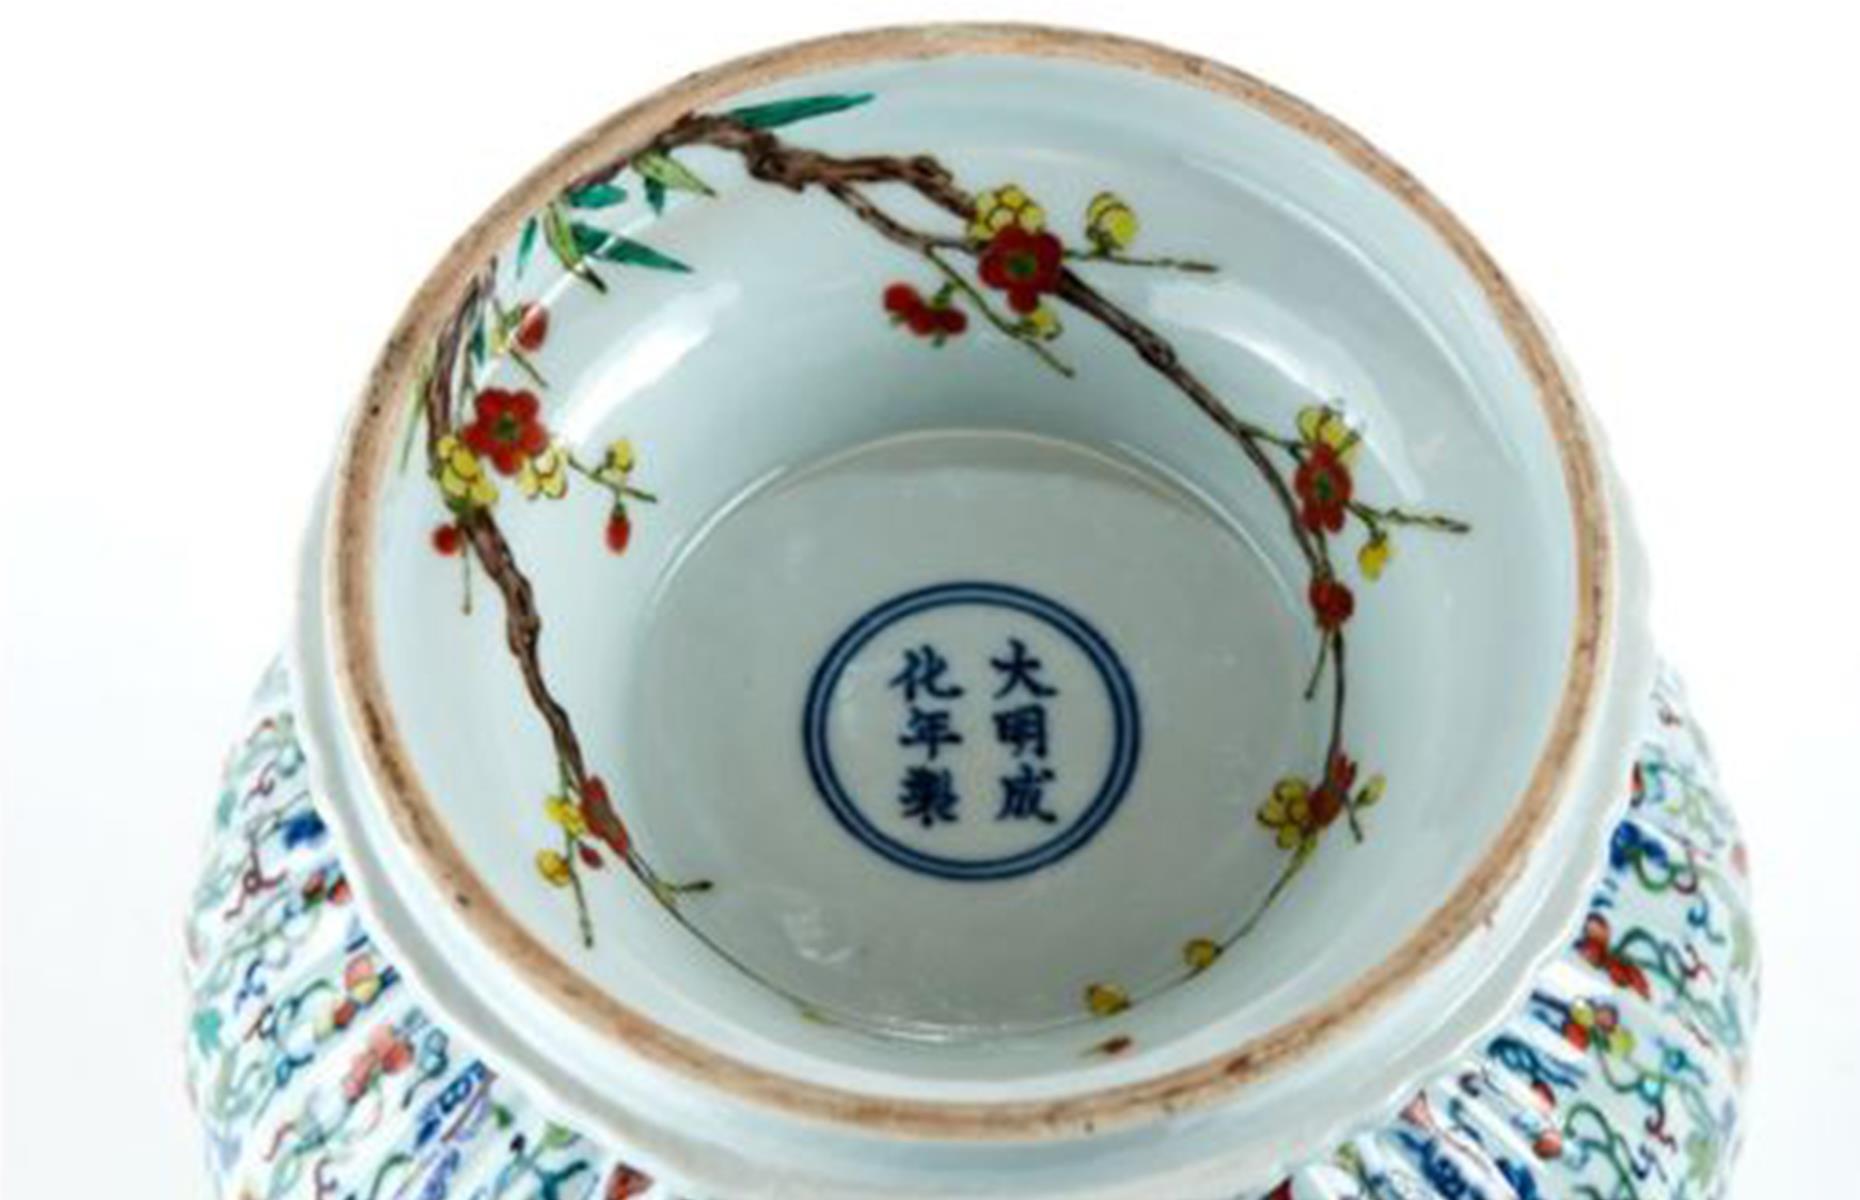 A rare Chinese vase found in a house clearance: $260,000 (£200k)